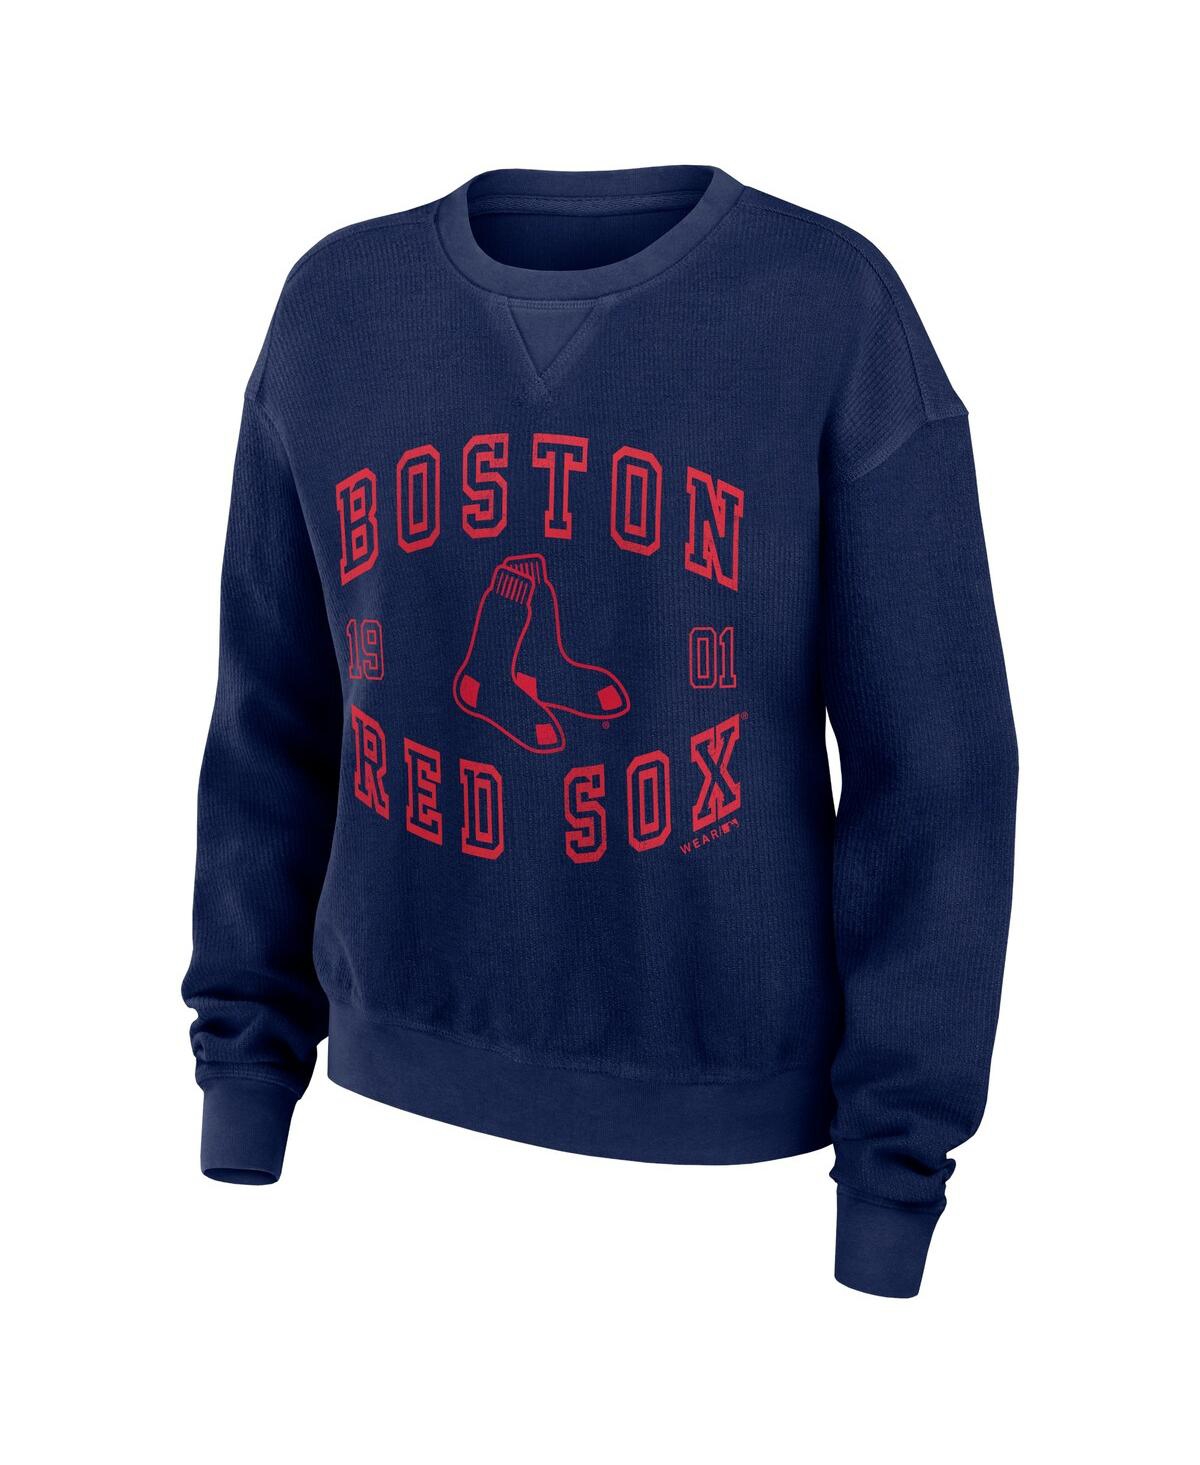 Shop Wear By Erin Andrews Women's  Navy Distressed Boston Red Sox Vintage-like Cord Pullover Sweatshirt